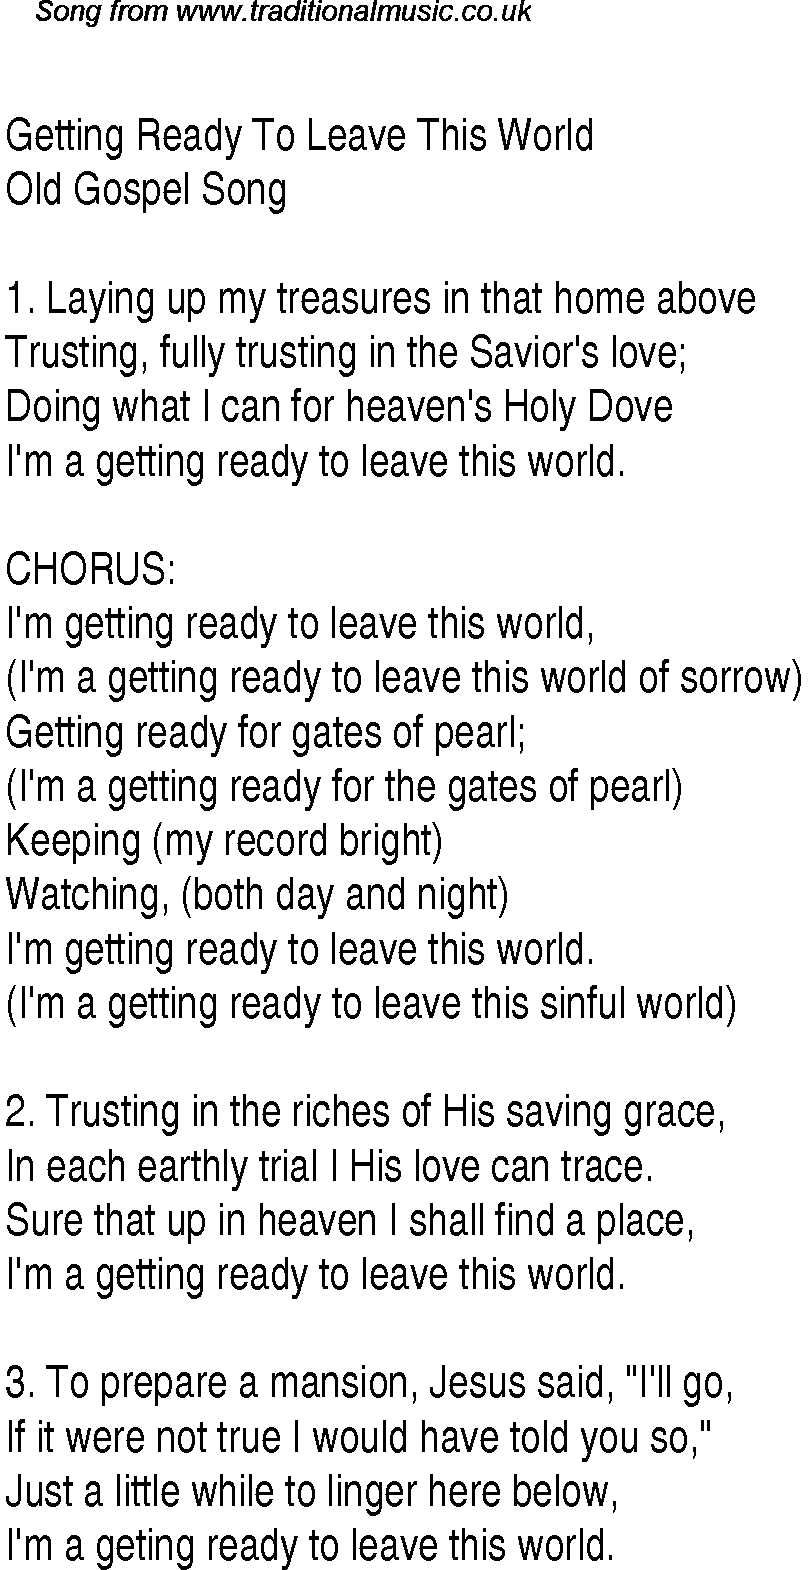 Gospel Song: getting-ready-to-leave-this-world, lyrics and chords.